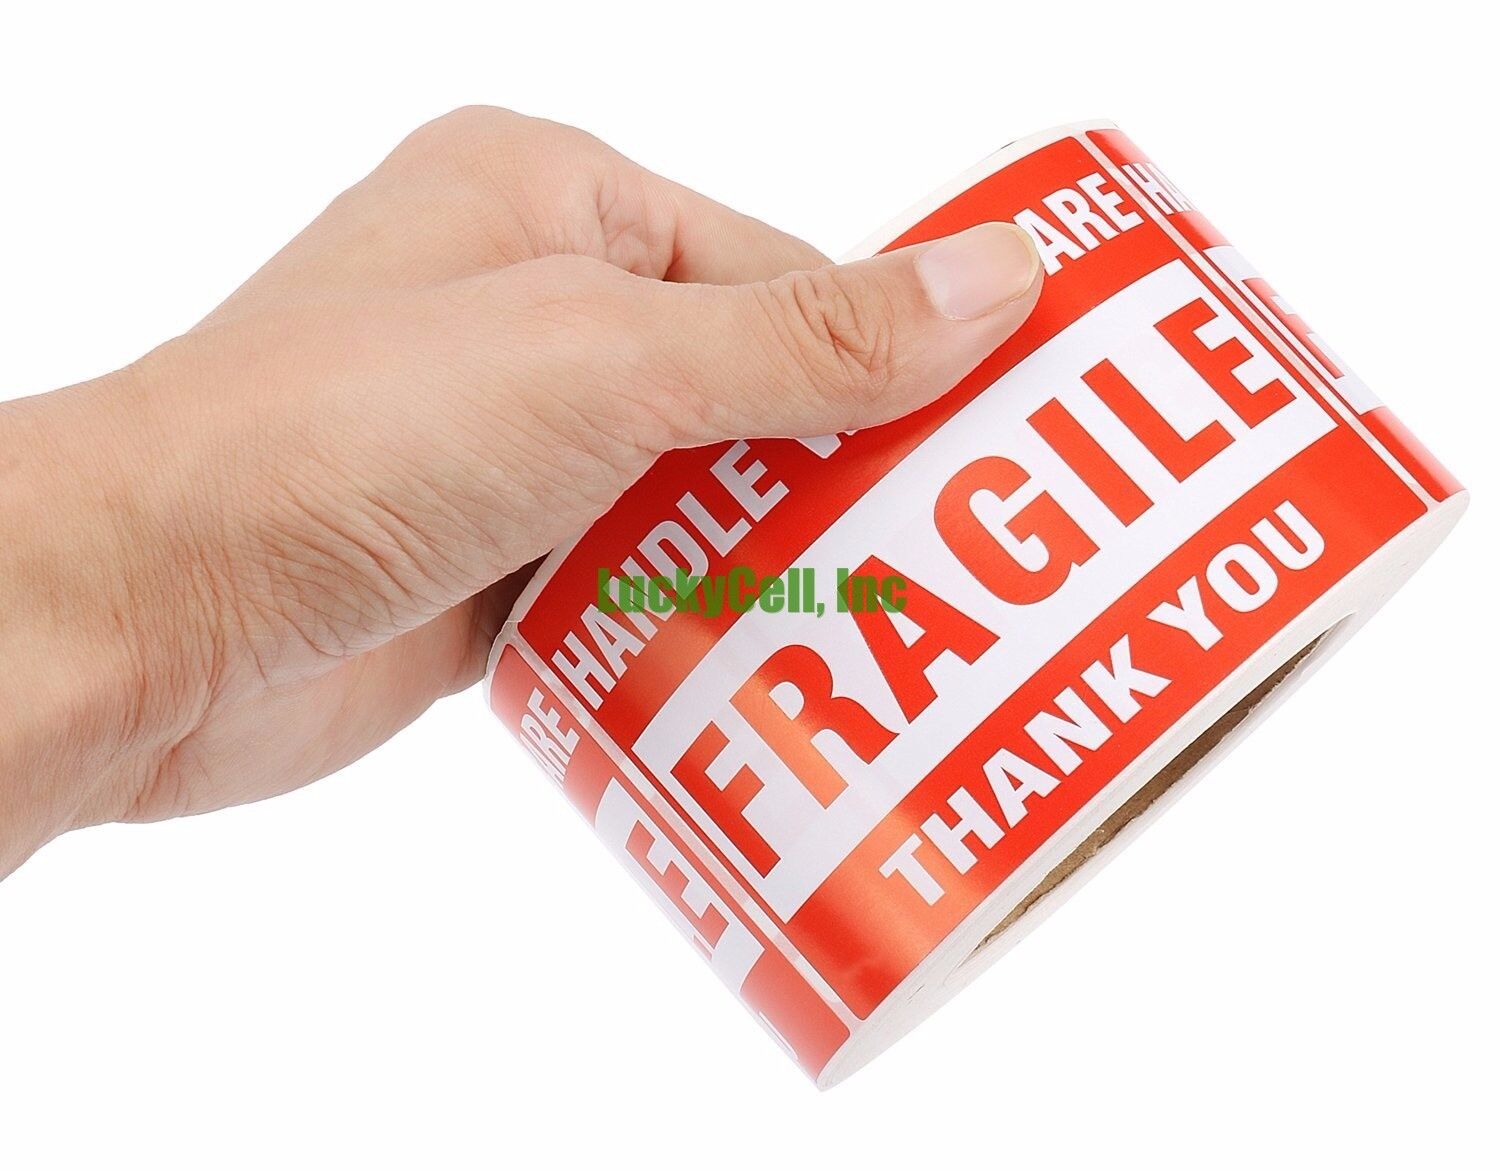 5000 Labels 3x5 Handle With Care Fragile Label Sticker 5 Rolls 1000 Per Roll